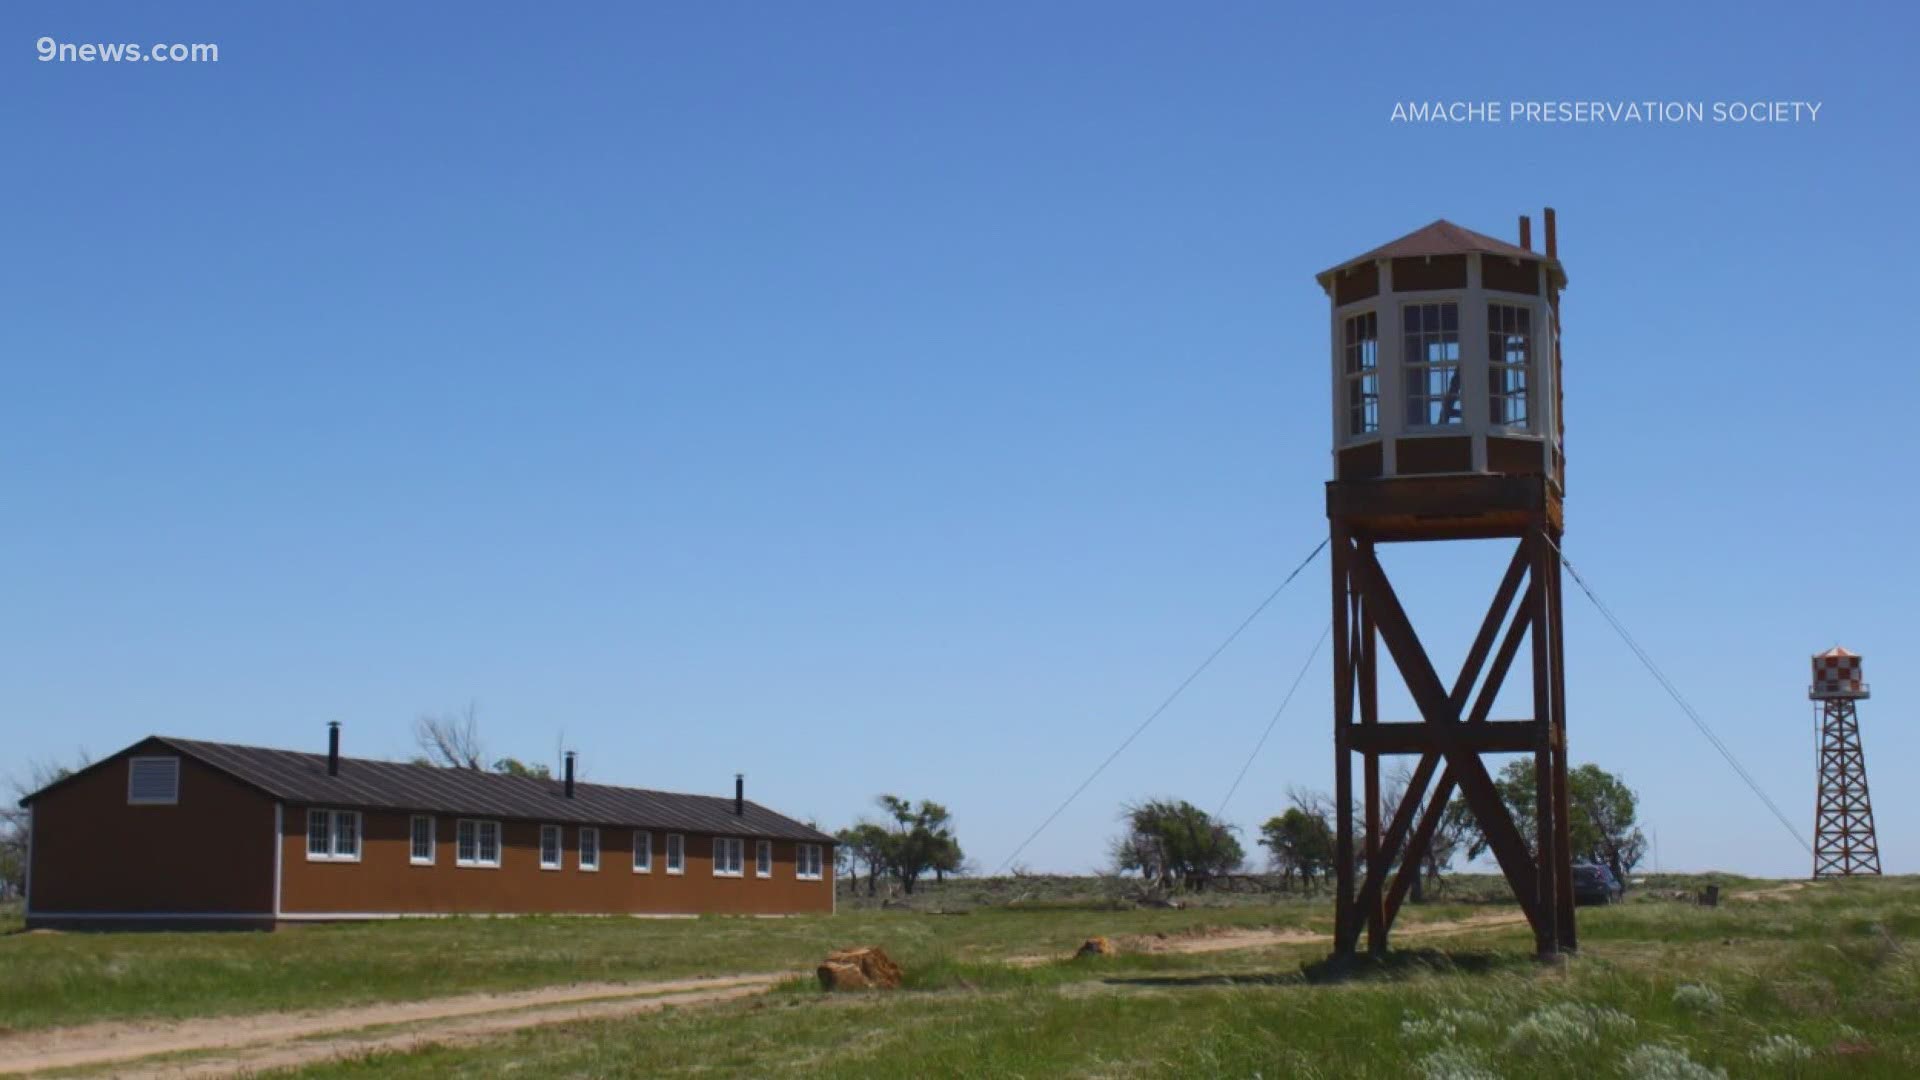 The Japanese internment camp near the small town of Granada on the Eastern Plains housed around 7,500 people at its height during World War II.